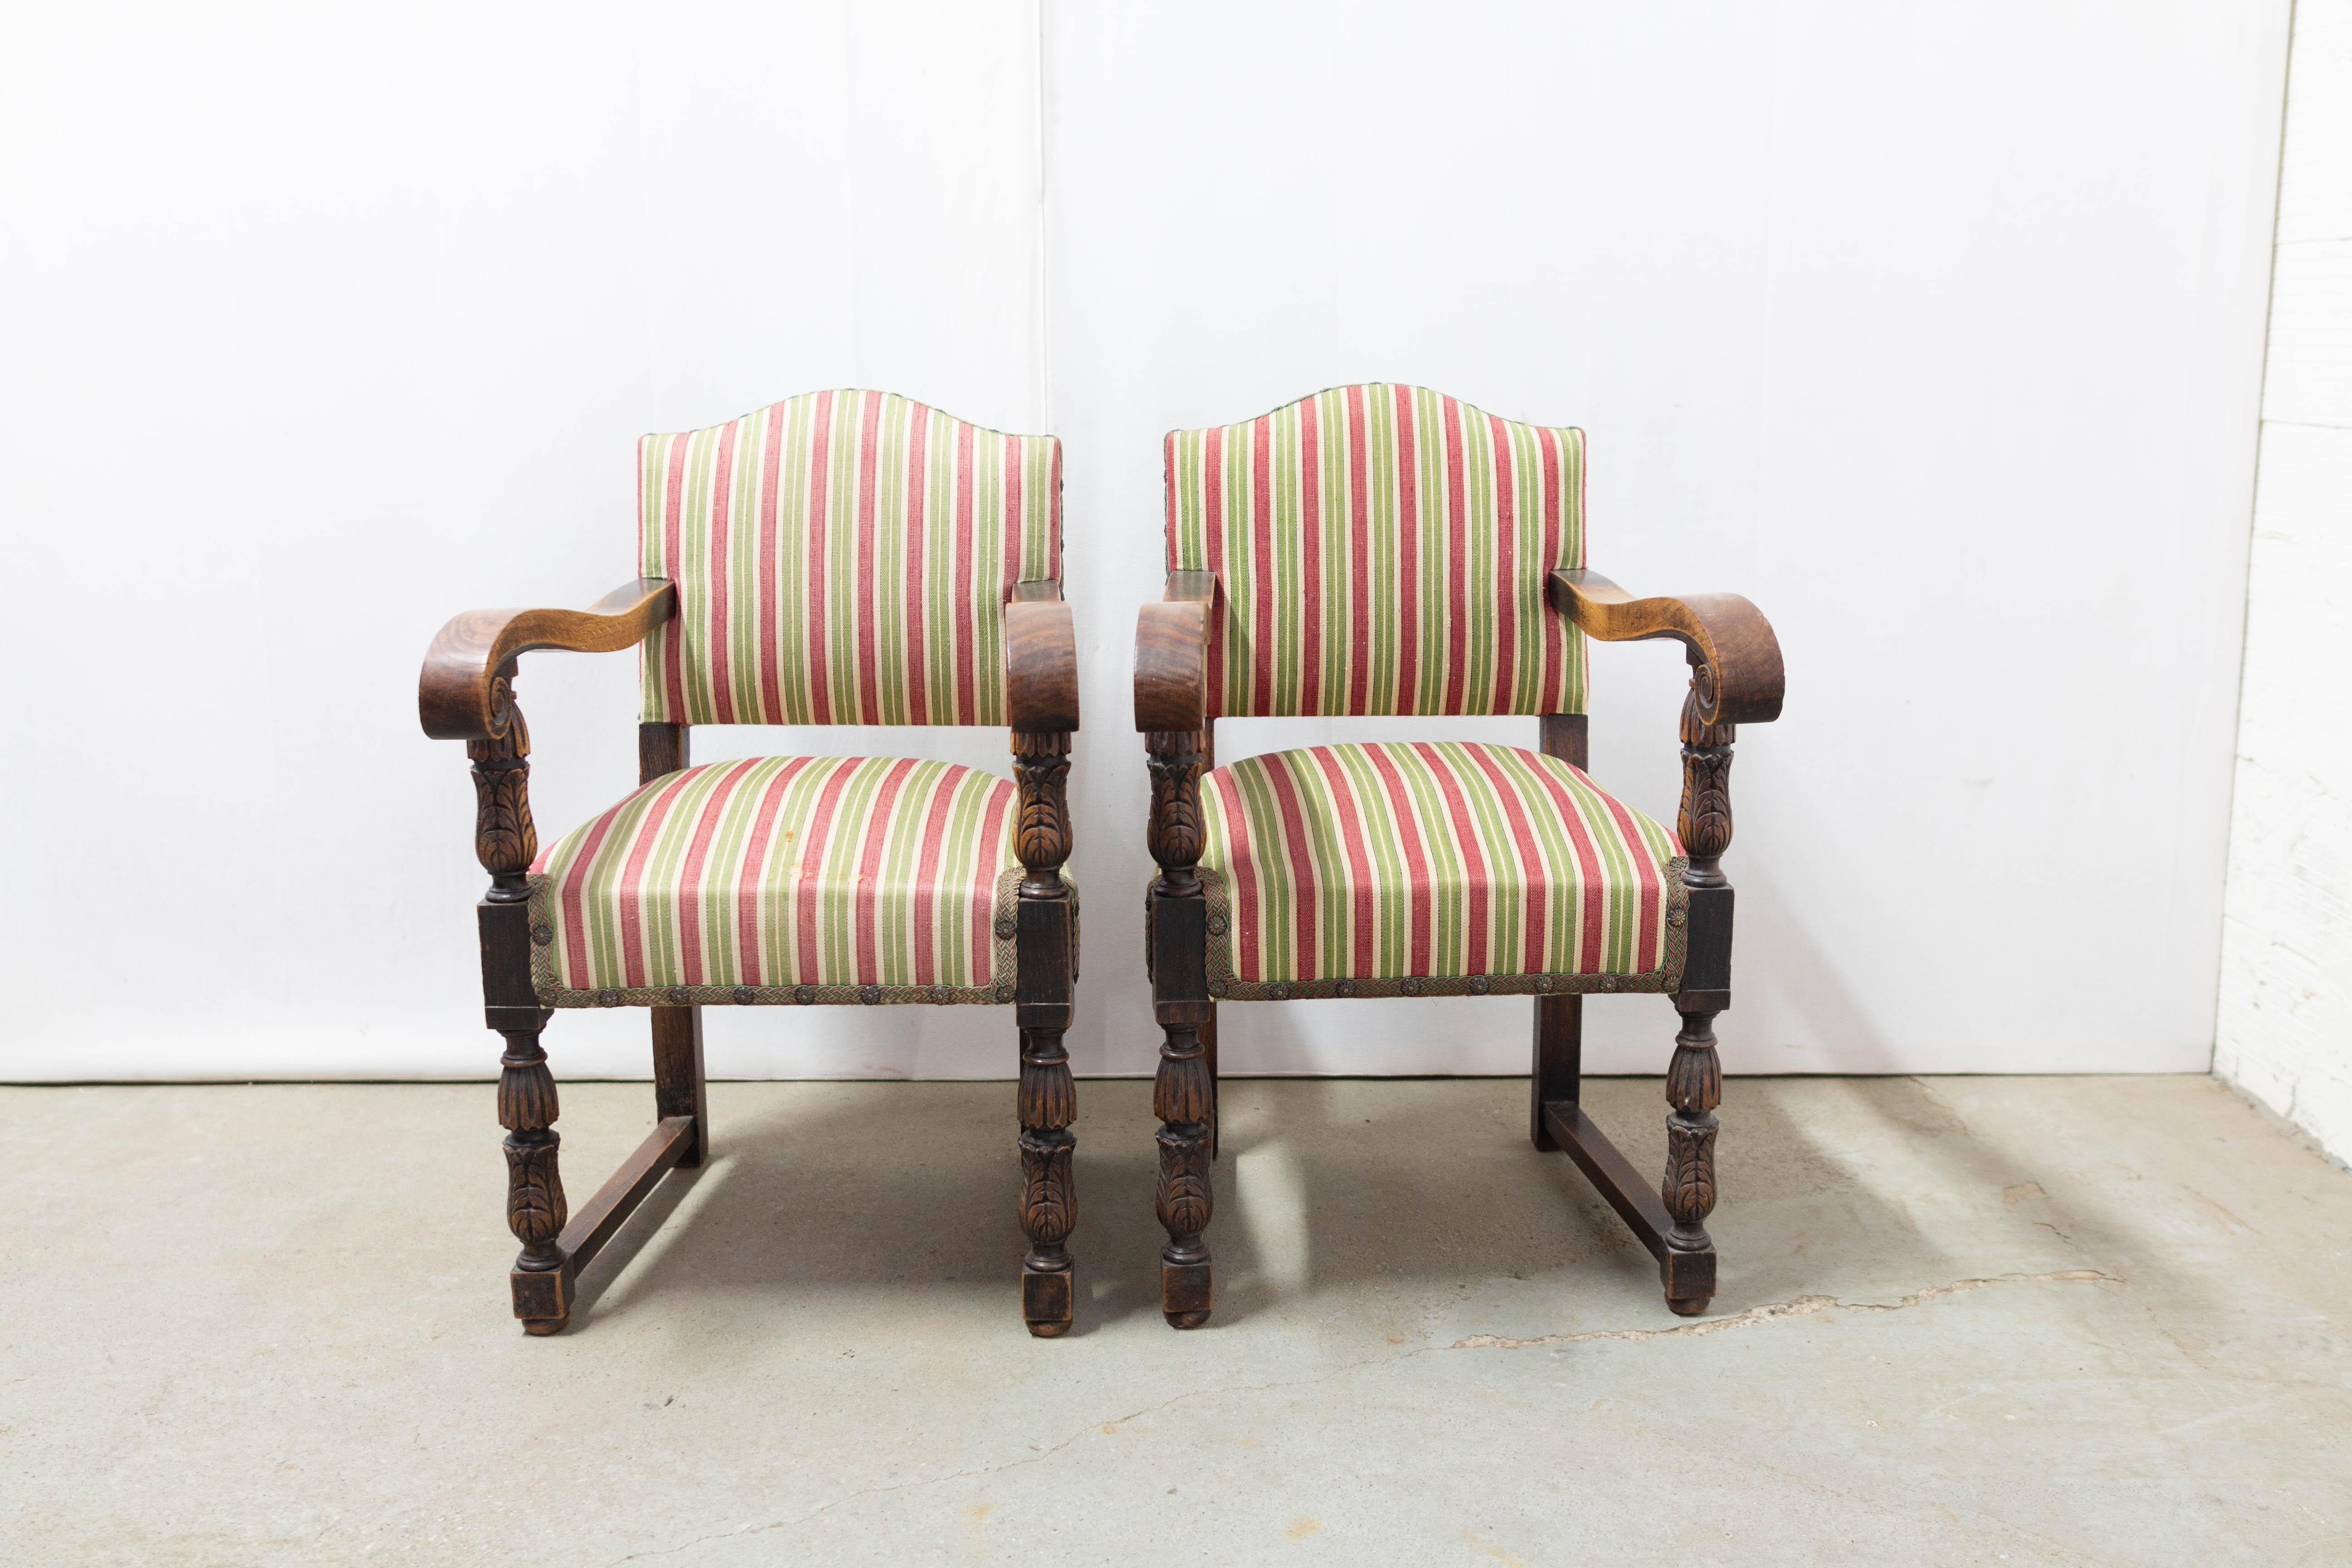 Midcentury vintage Spanish pair of armchairs in chestnut
If you wish, we offer you the recovering by our upholsterer with the fabric you will send us.
Good condition, solid and sound.

Shipping:
1 pack:L 127 P59 H 90 28 KG